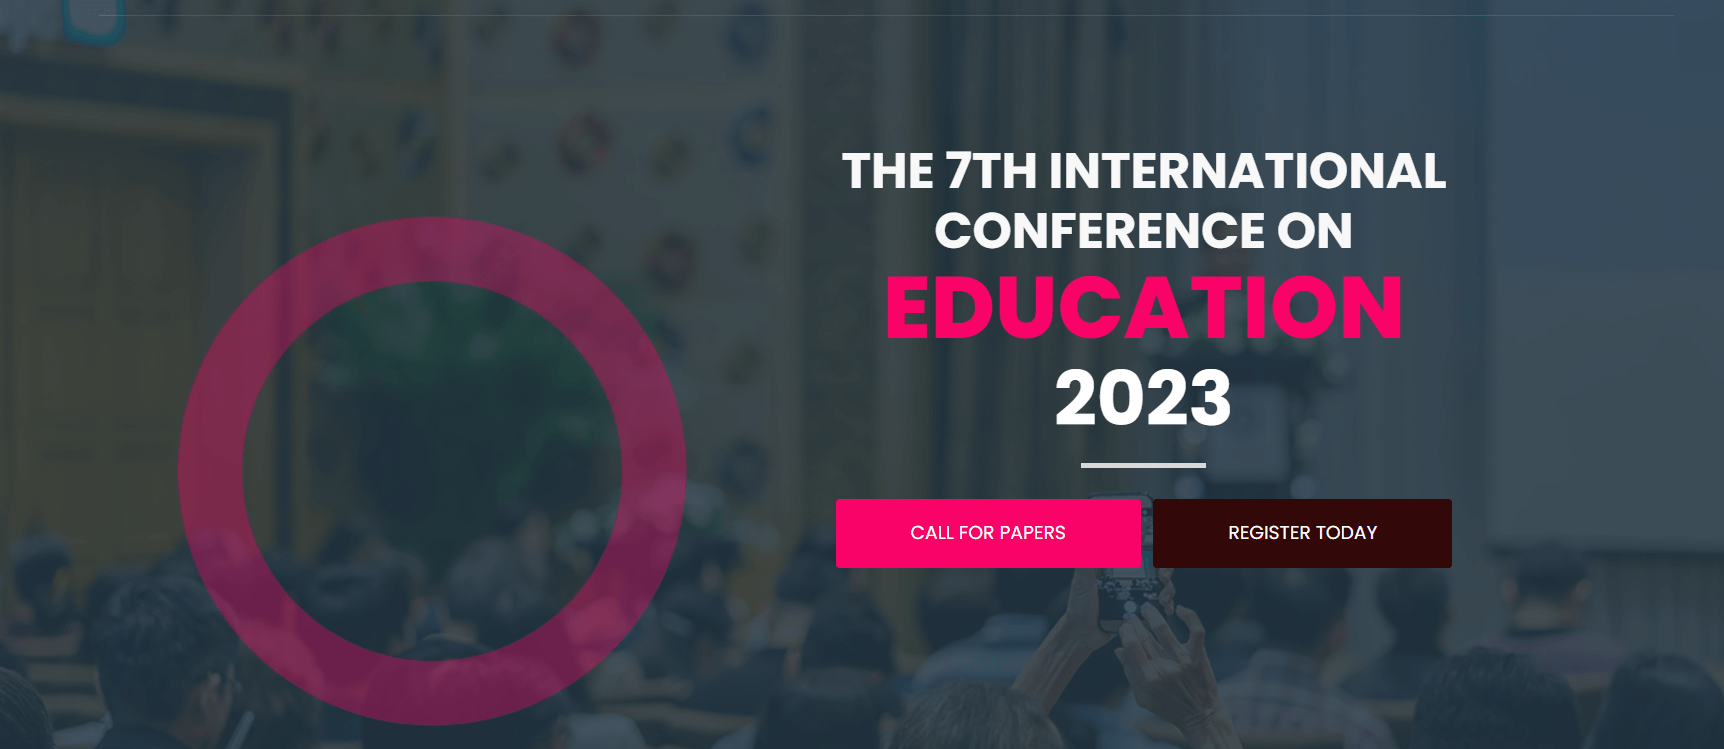 education conferences in africa 2023